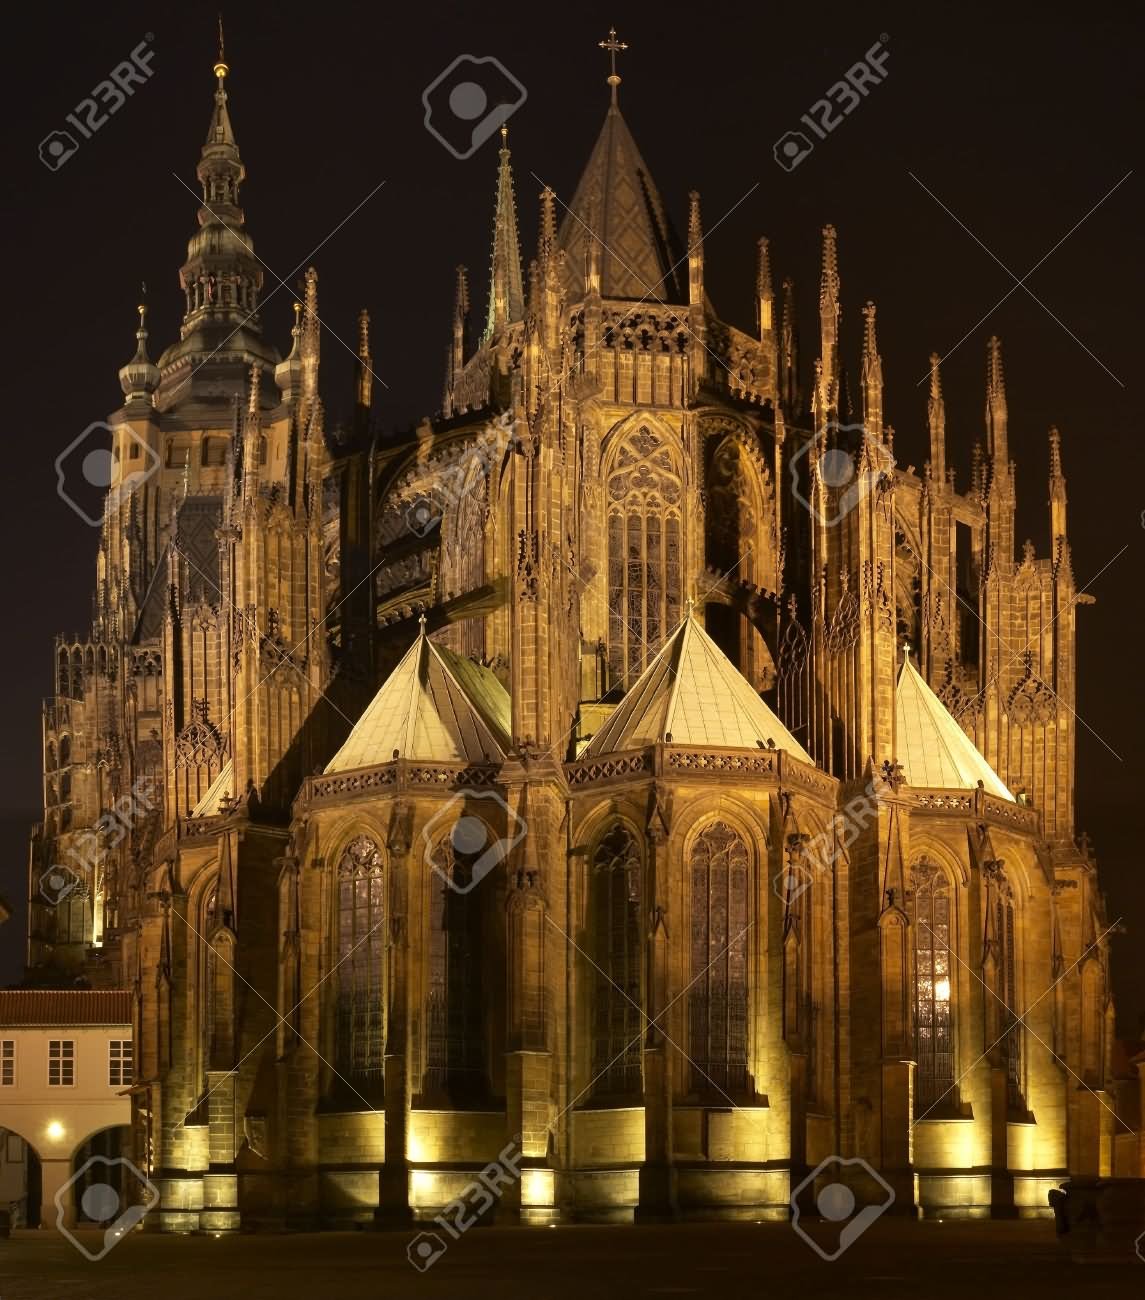 St Vitus Cathedral Located In Prague Castle At Night